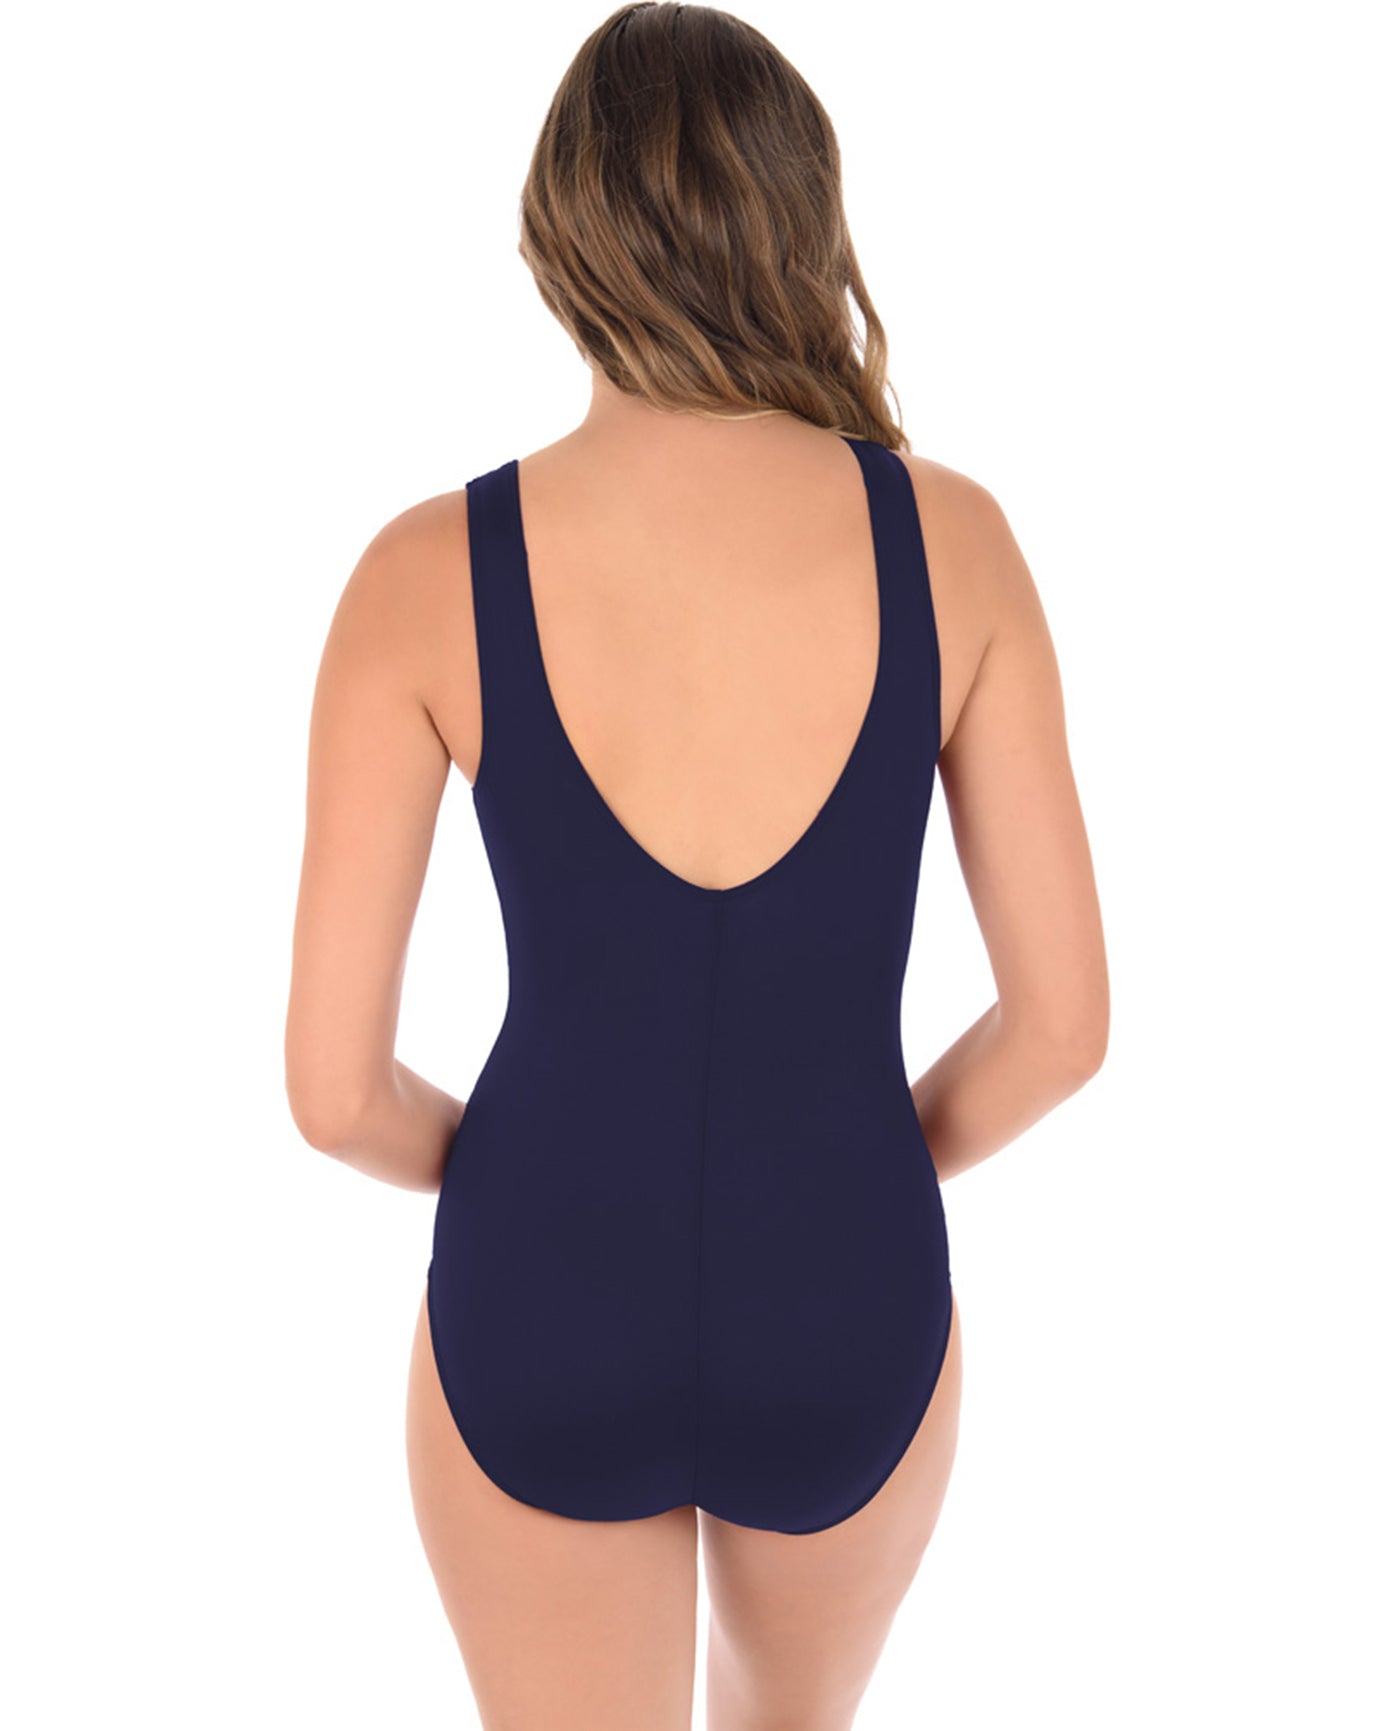 Back View Of Miraclesuit Illusionist Black Palma Mesh High Neck One Piece Swimsuit | MIR Midnight Blue